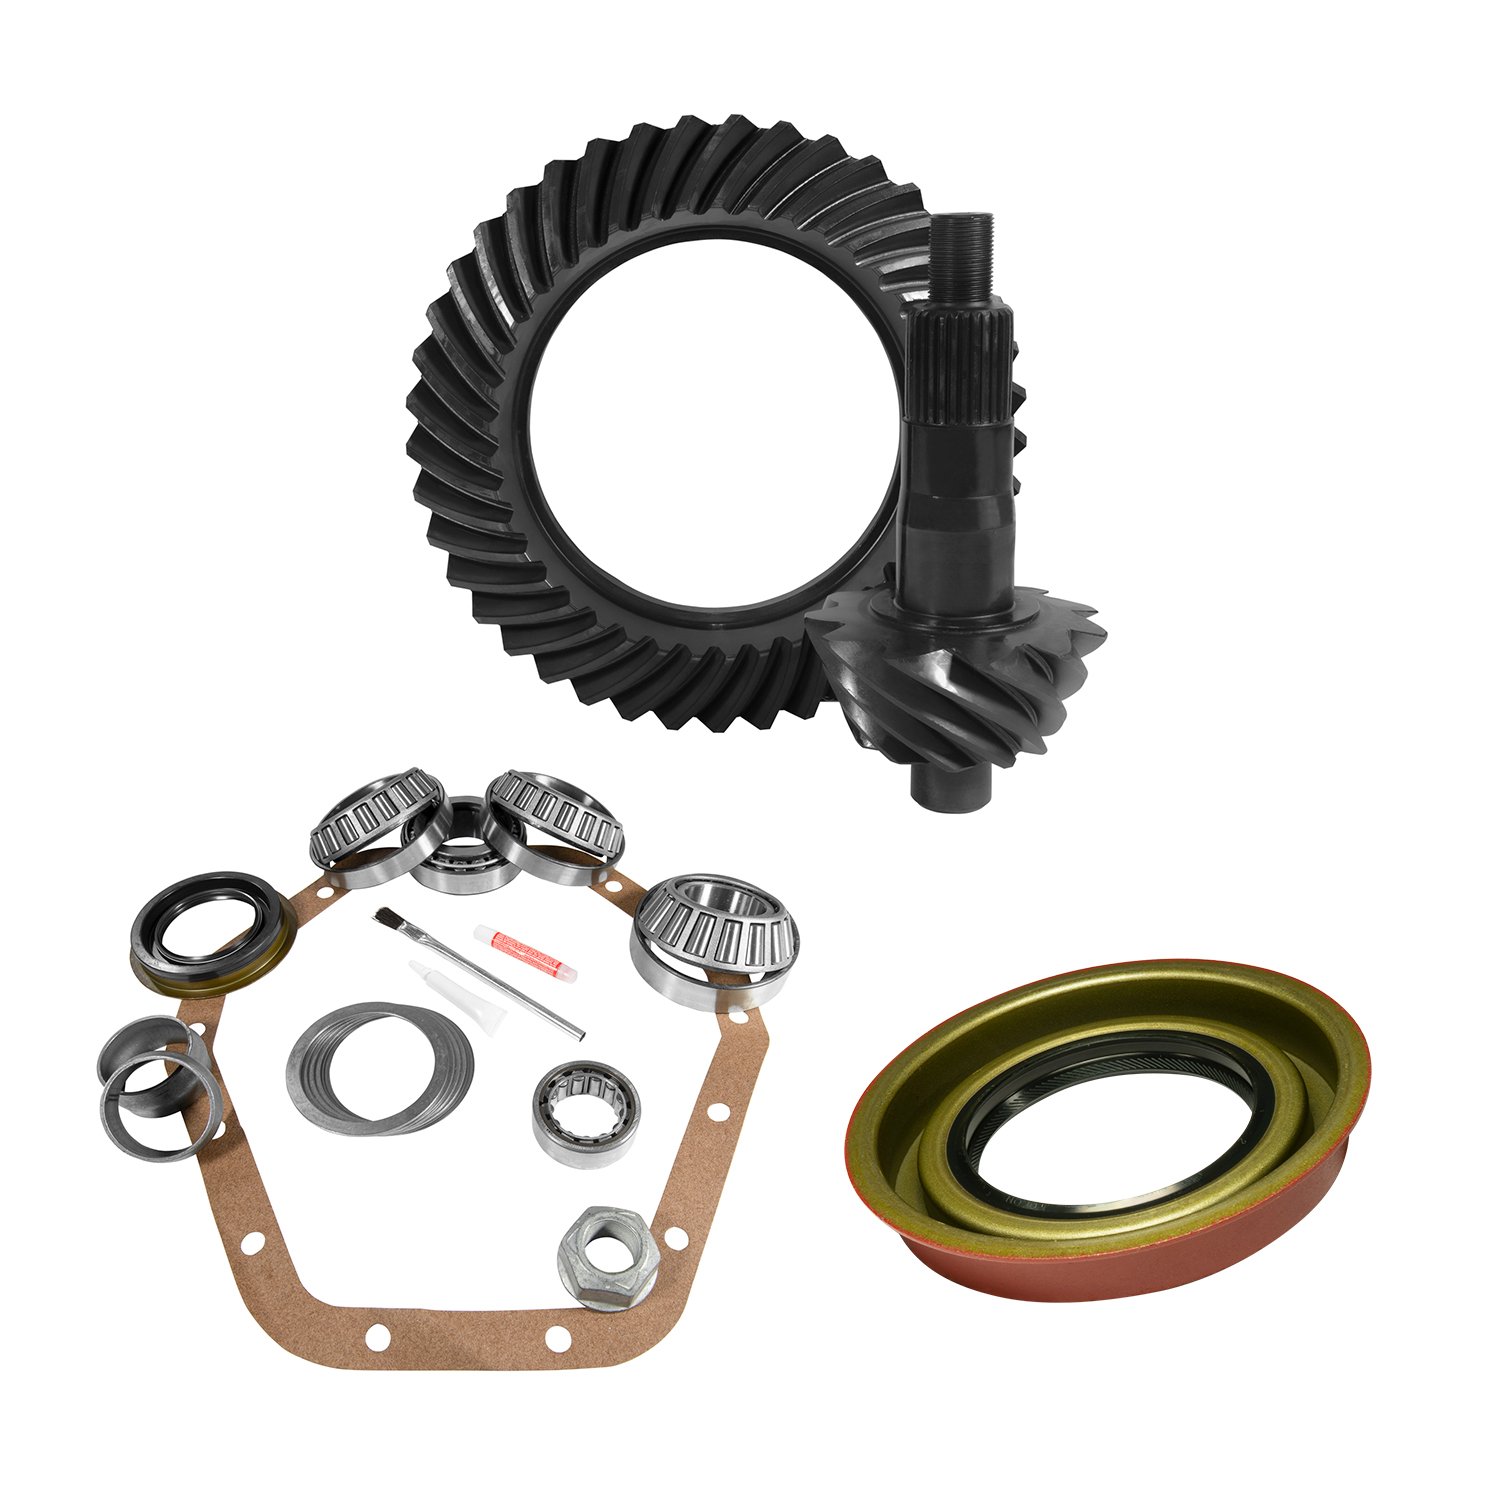 USA Standard 10835 Ring & Pinion And Install Kit, 10.5 in. GM 14 Bolt, 4.88 Thick Rear